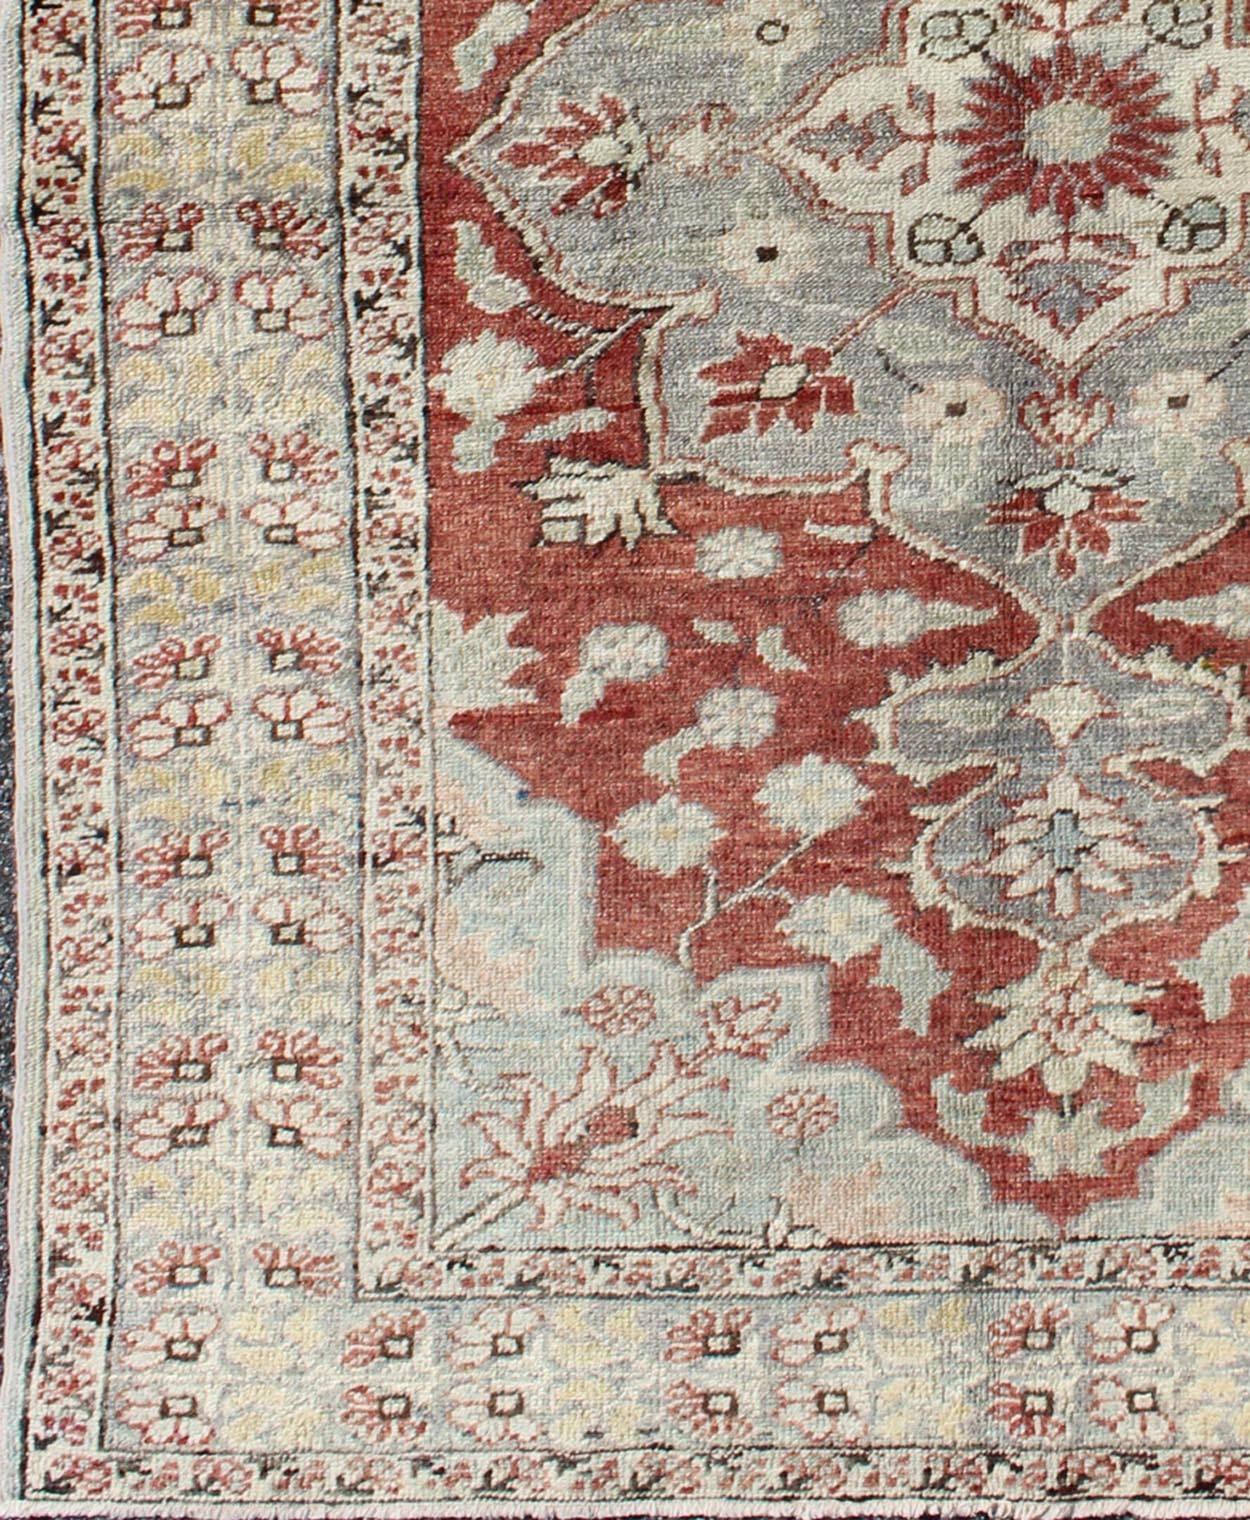 vintage Turkish Sivas rug with floral medallion in red, light blue and gray with yellow green border , rug na-54734, country of origin / type: Turkey / Sivas, circa mid-20th century

This vintage Turkish finely woven Sivas carpet (2nd quarter of